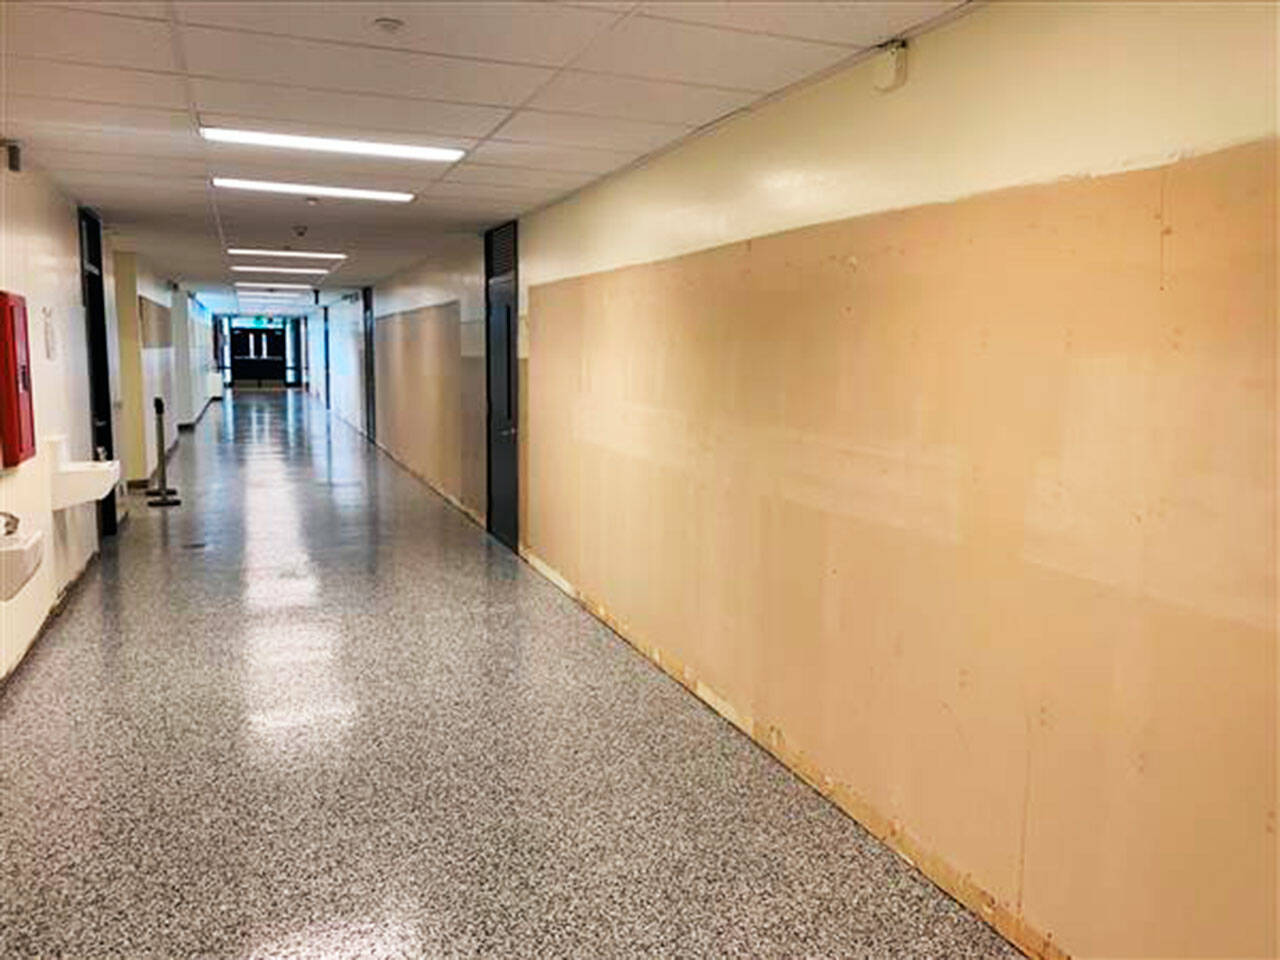 A renovated hallway at Canyon Ridge Middle School is the former Kent Phoenix Academy and Sequoia Middle School. COURTESY PHOTO, Kent School District